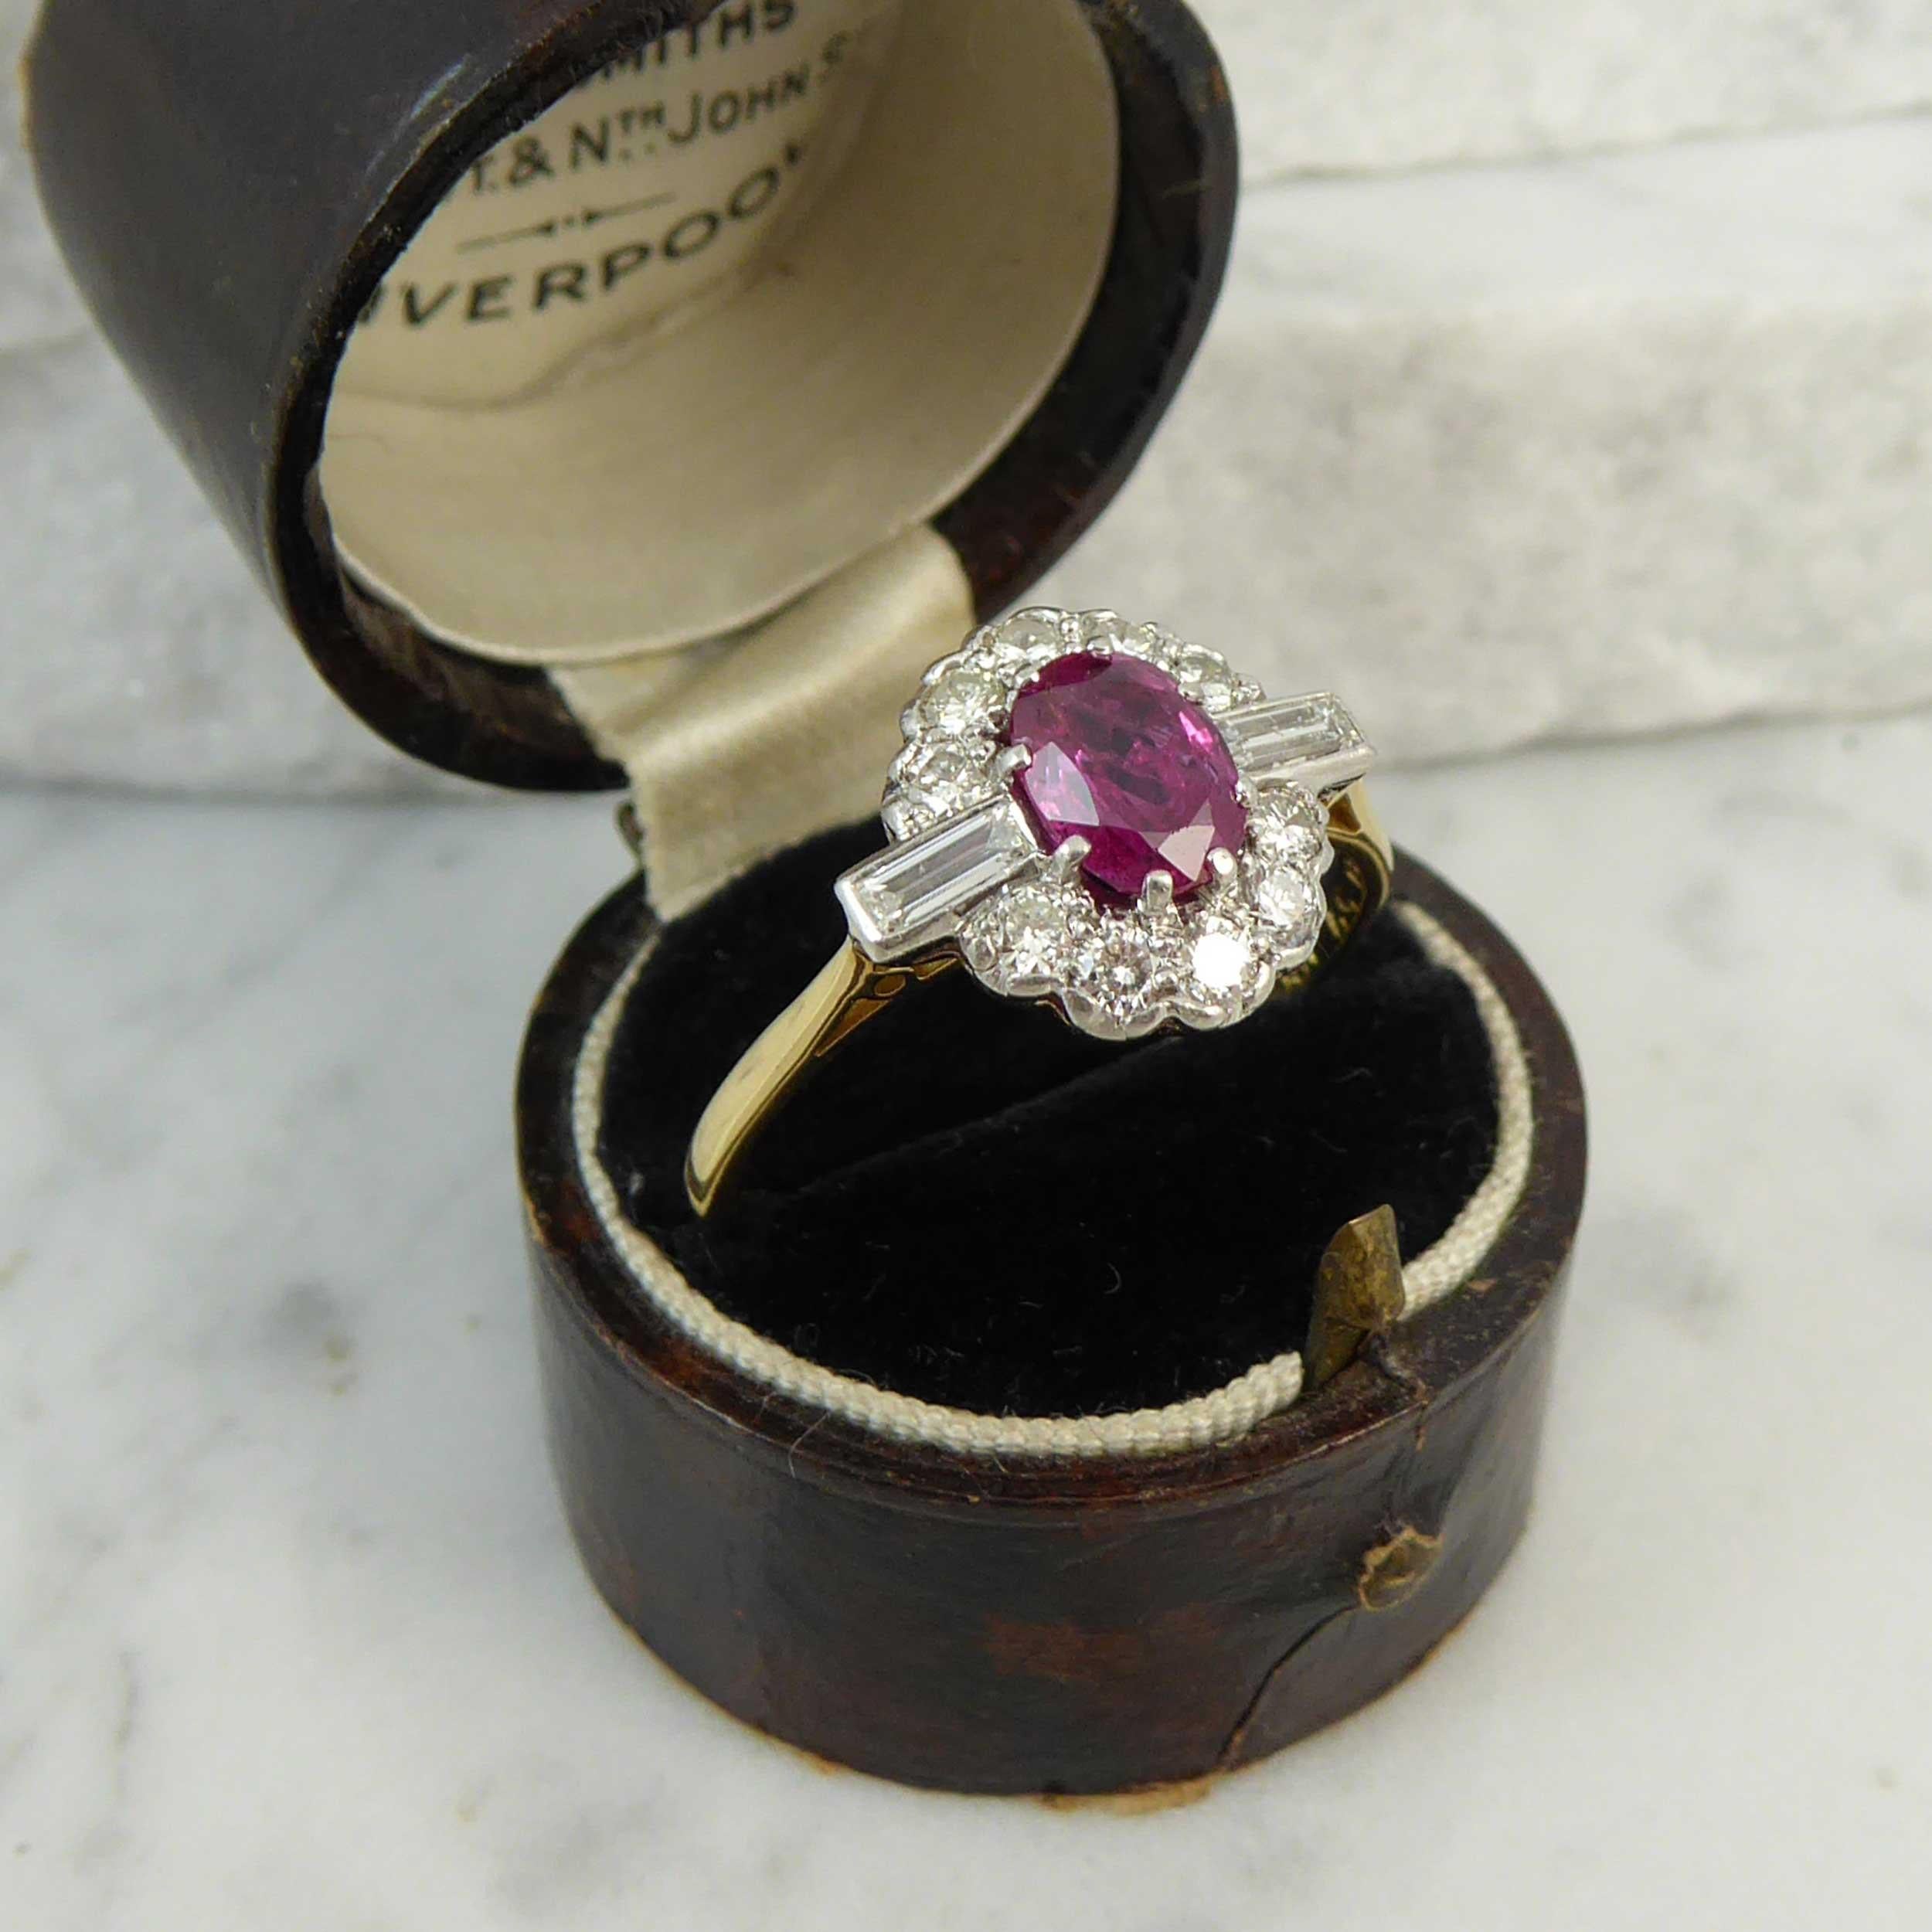 Modern, pre-owned ruby and diamond ring in a traditional style.  The ring is set to the centre with an oval mixed cut ruby, measuring approx. 6.74mm x 5.04mm x 3.45mm deep, and held in white claw settings to a surround of 10 round brilliant cut